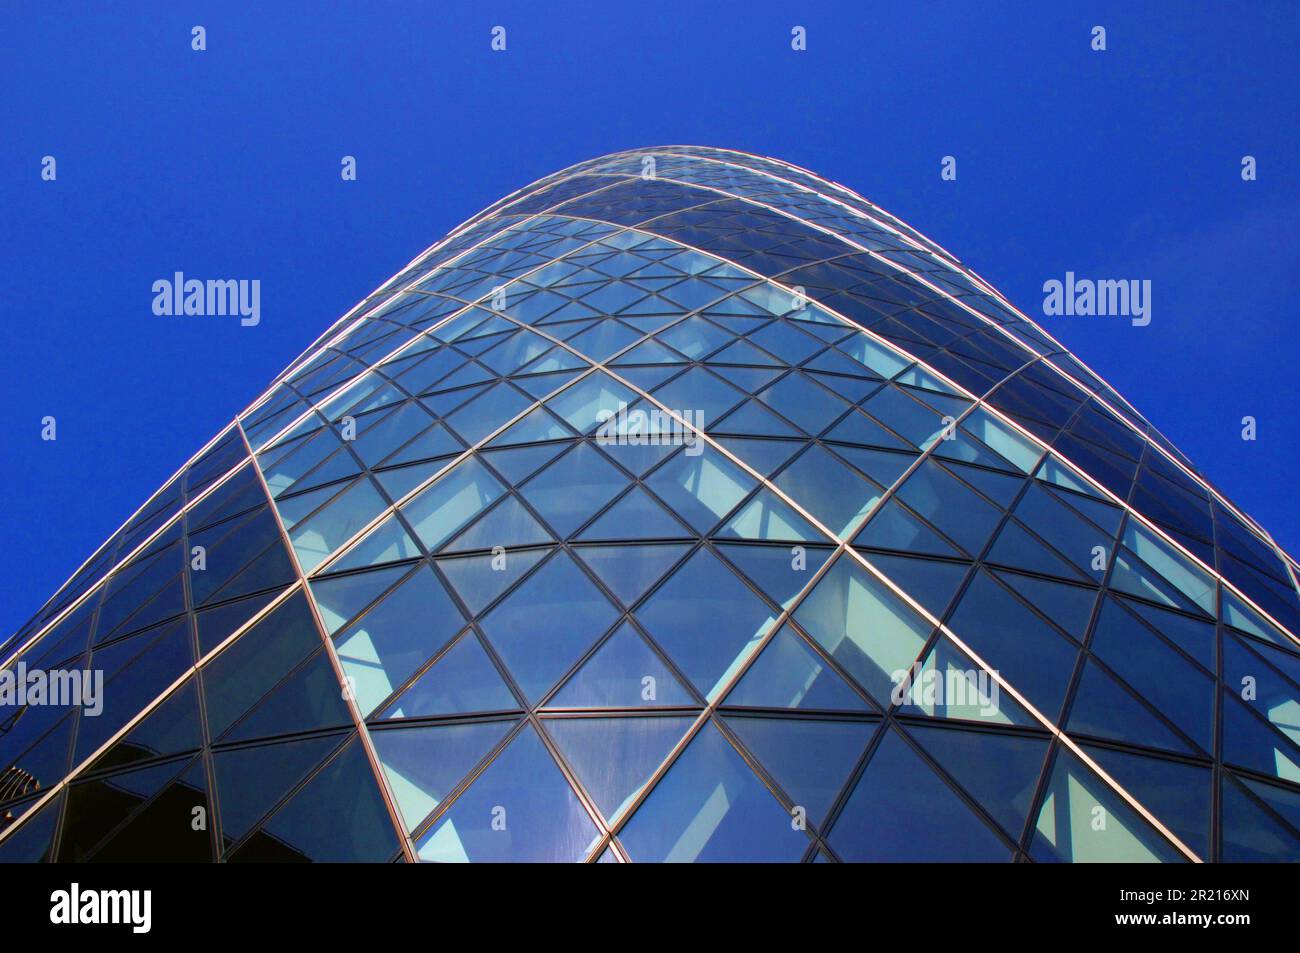 'The Gherkin' or Swiss Re Tower at 30 St Mary Axe in London's main financial district. It is 180 metres tall, making it the second-tallest building in the City of London, after Tower 42, and the sixth-tallest in London as a whole. The building was designed by Pritzker Prize-winner Lord Foster and ex-partner Ken Shuttleworth and Arup engineers, and was constructed by Skanska of Sweden between 2001 and 2004. Stock Photo